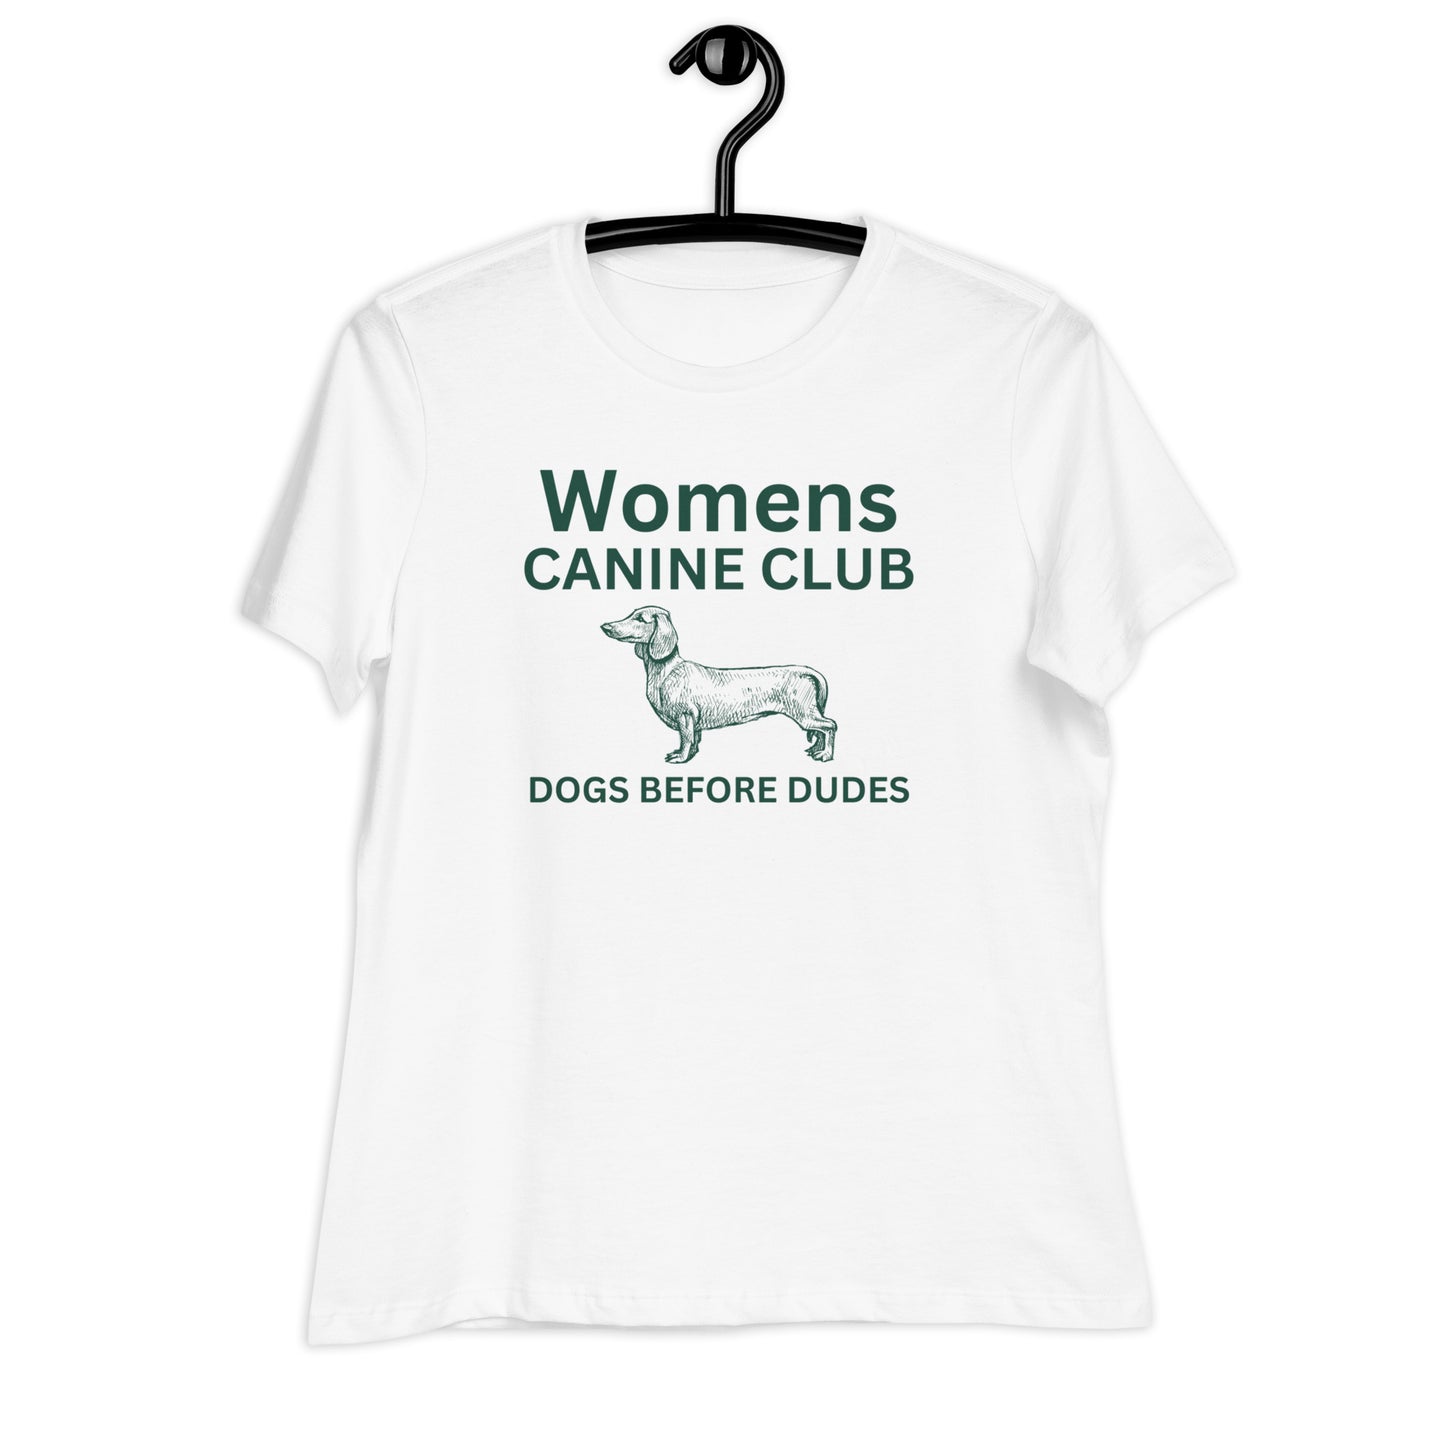 Canine Club Women's Relaxed T-Shirt